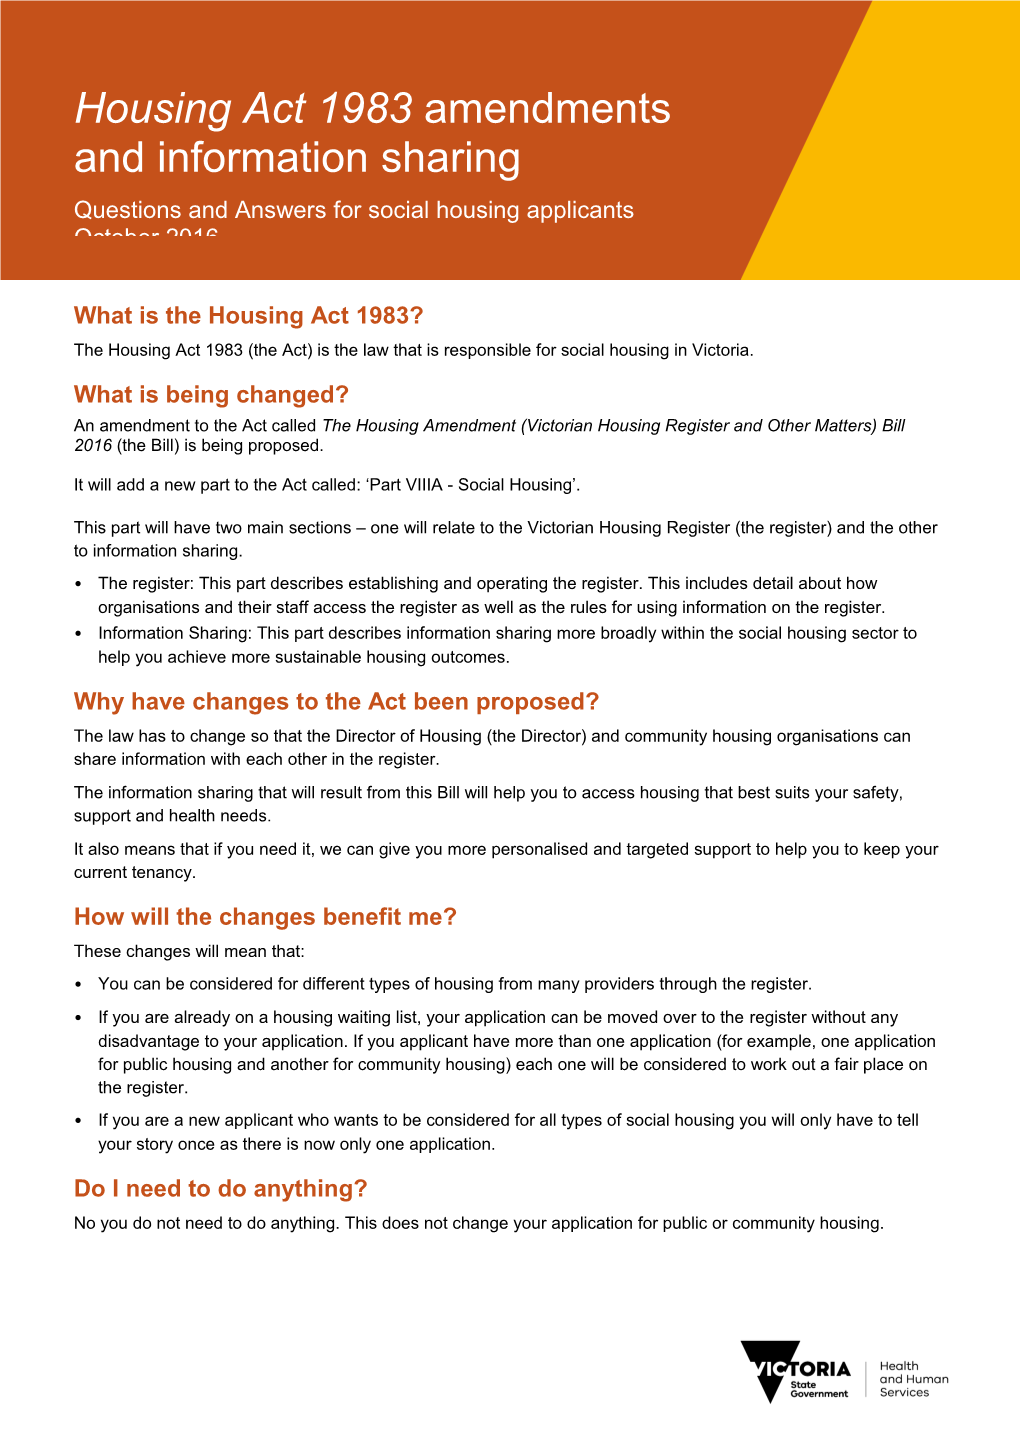 Housing Act 1983 Amendments and Information Sharing- Questions and Answers for Applicants